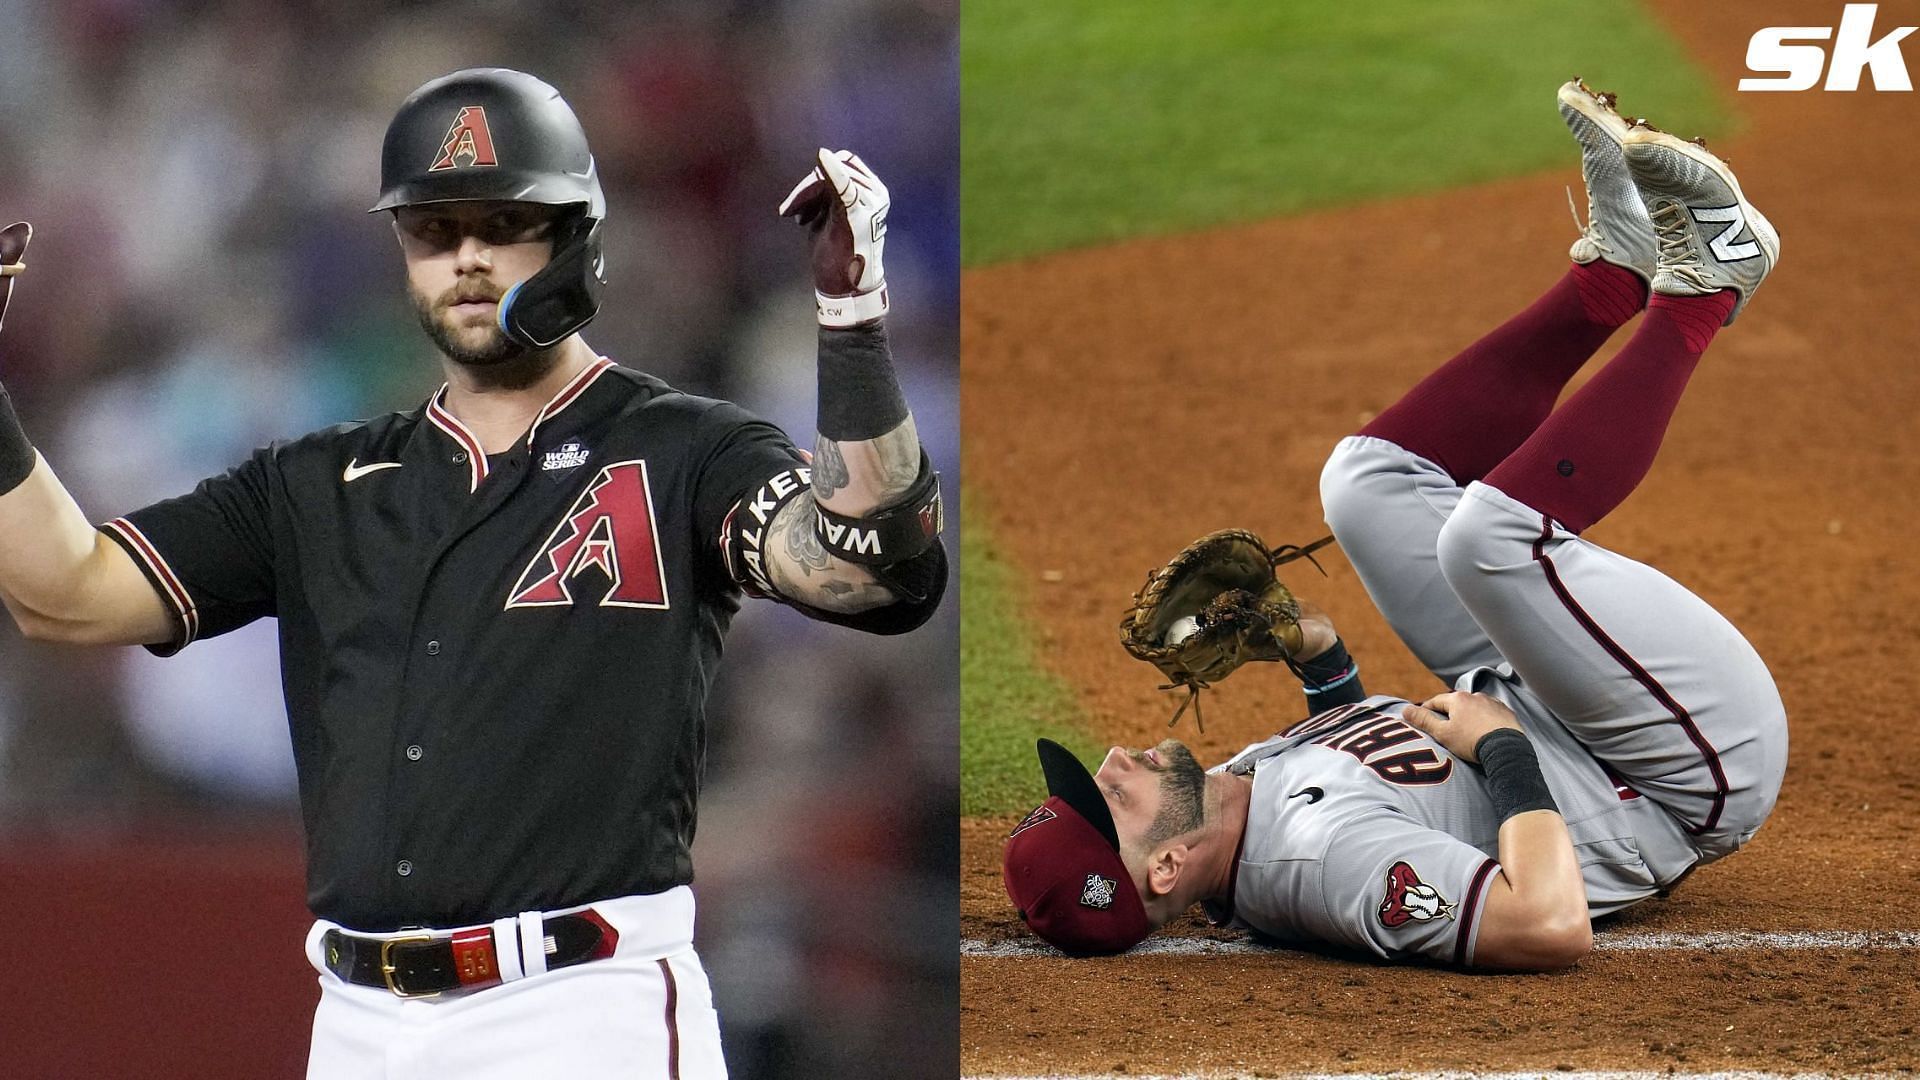 Diamondbacks will come out hungrier than ever in game 5 of the World Series, claims Christian Walker: &quot;Going to fight as hard as we can&quot;